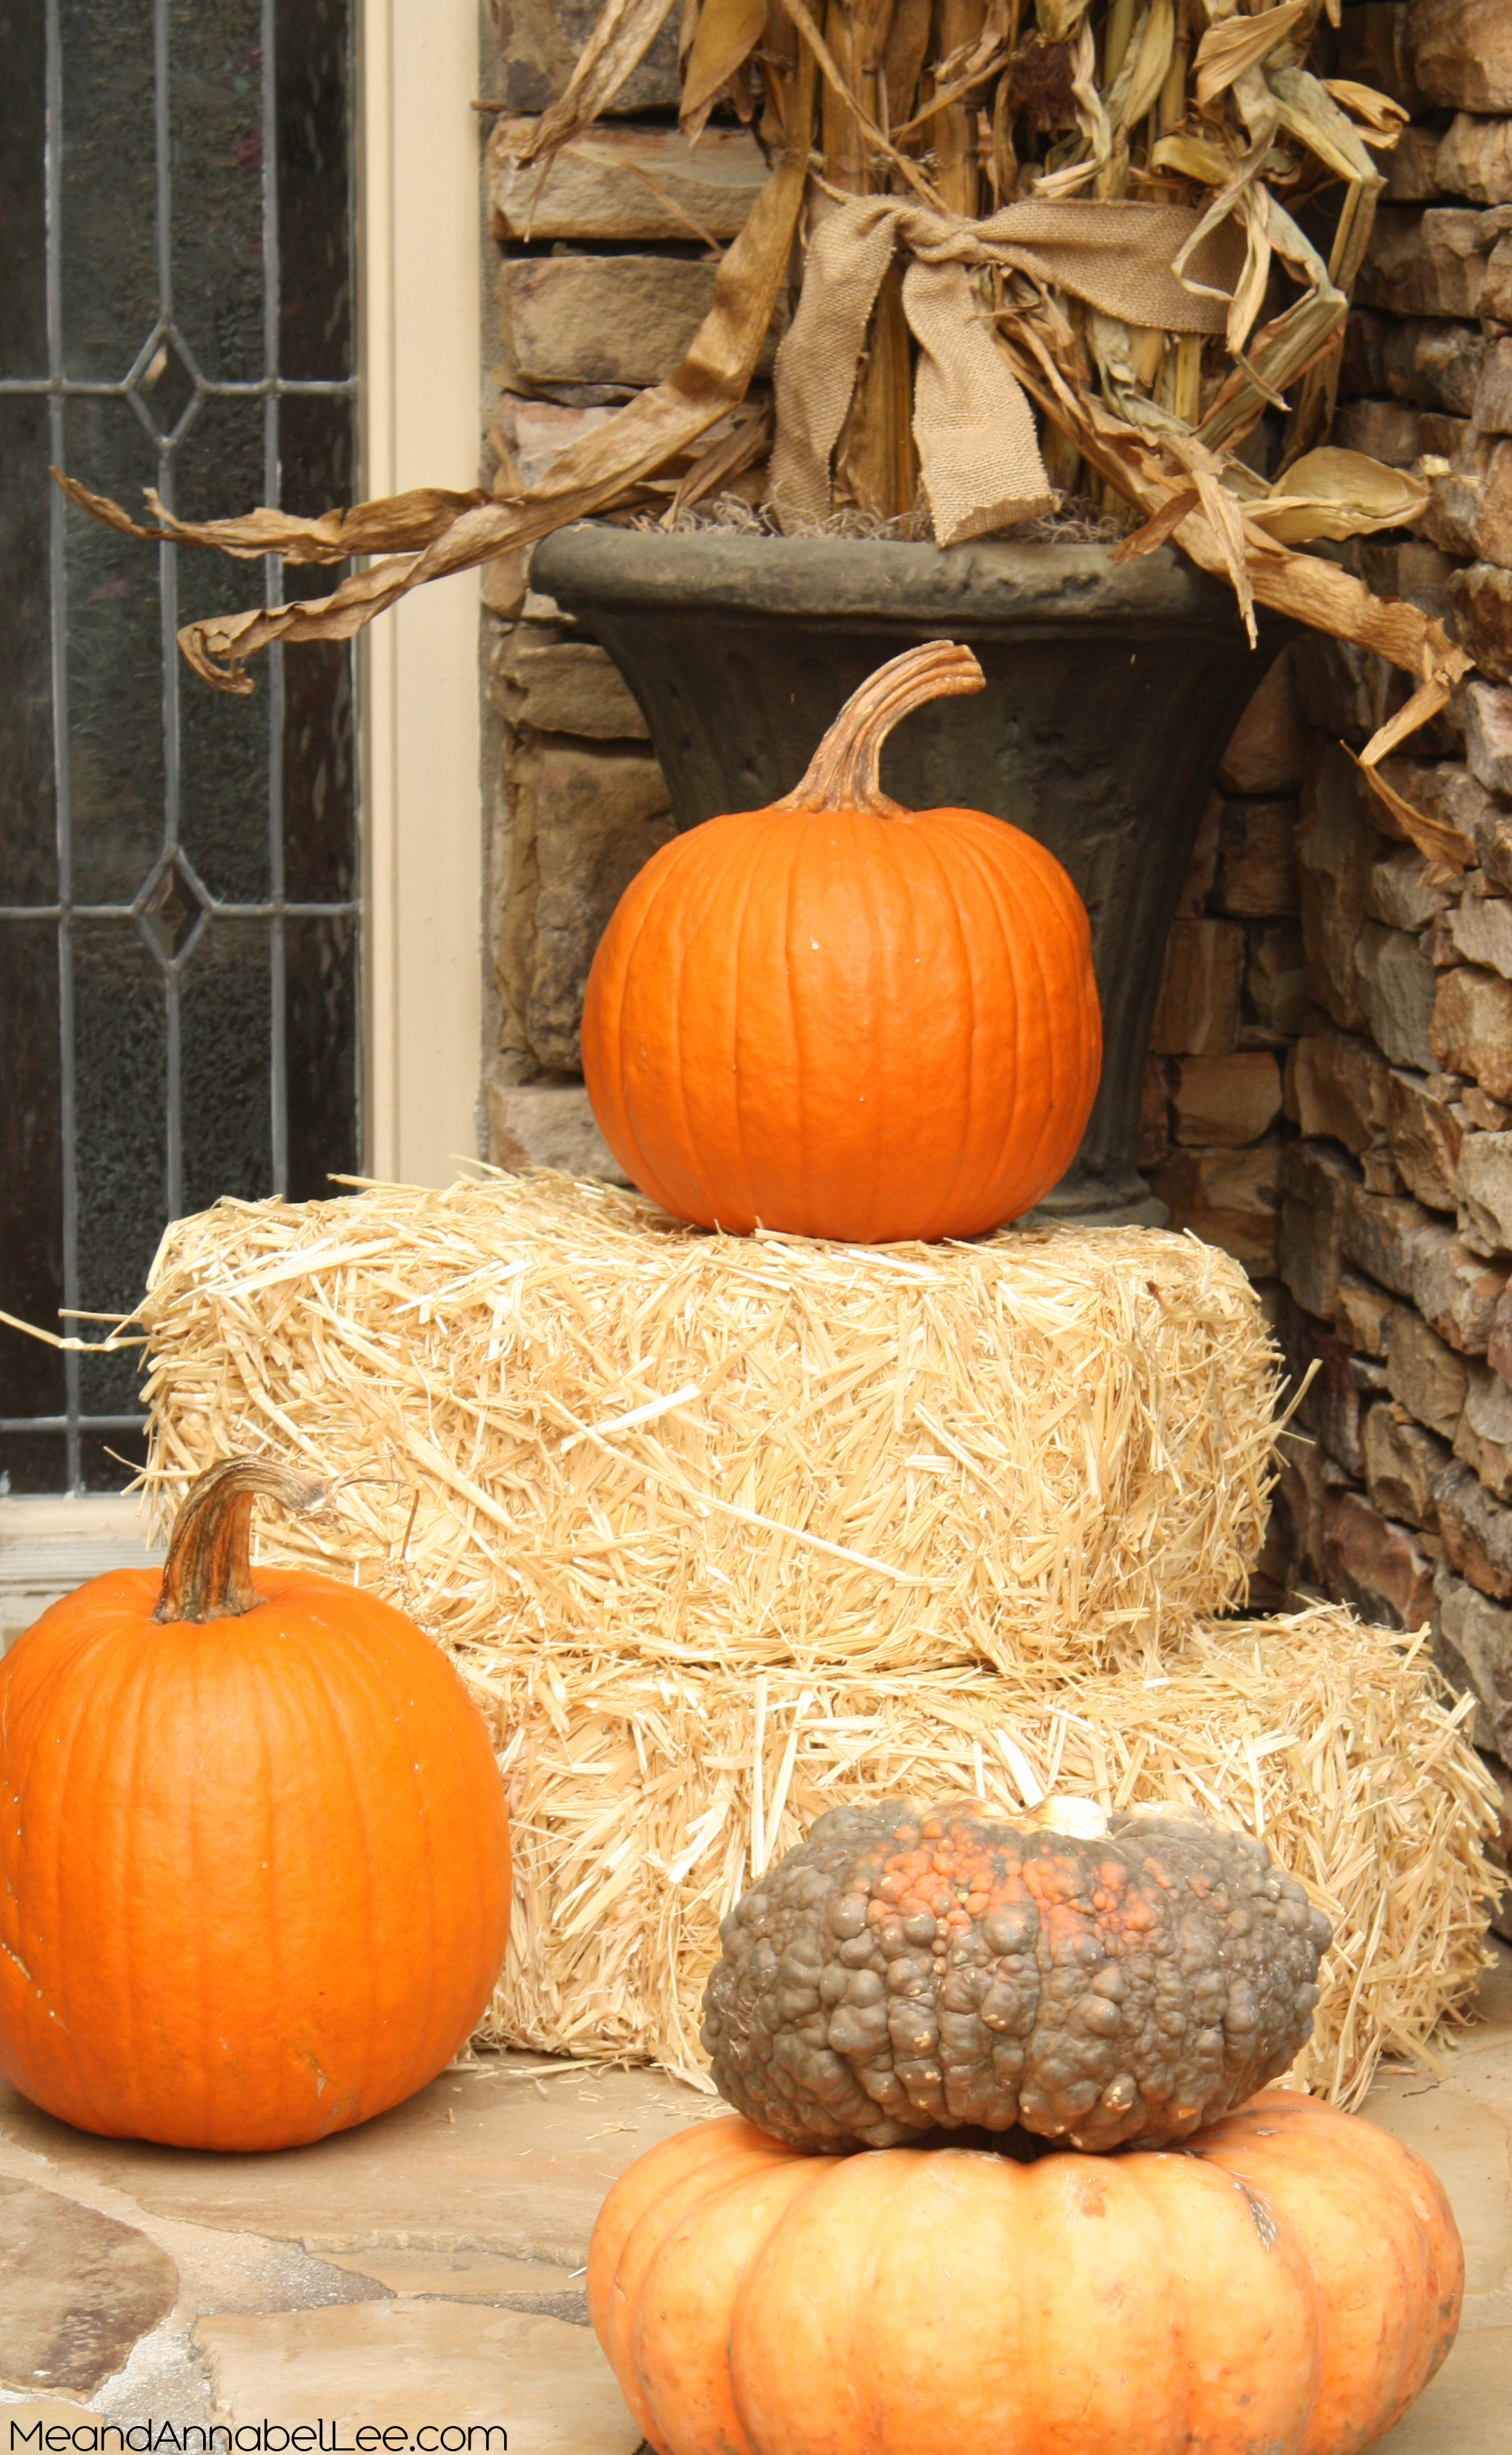 Autumn Door Decor - Deck out your Front Entry for Fall - Thanksgiving Decor.... www.MeandAnnabelLee.com